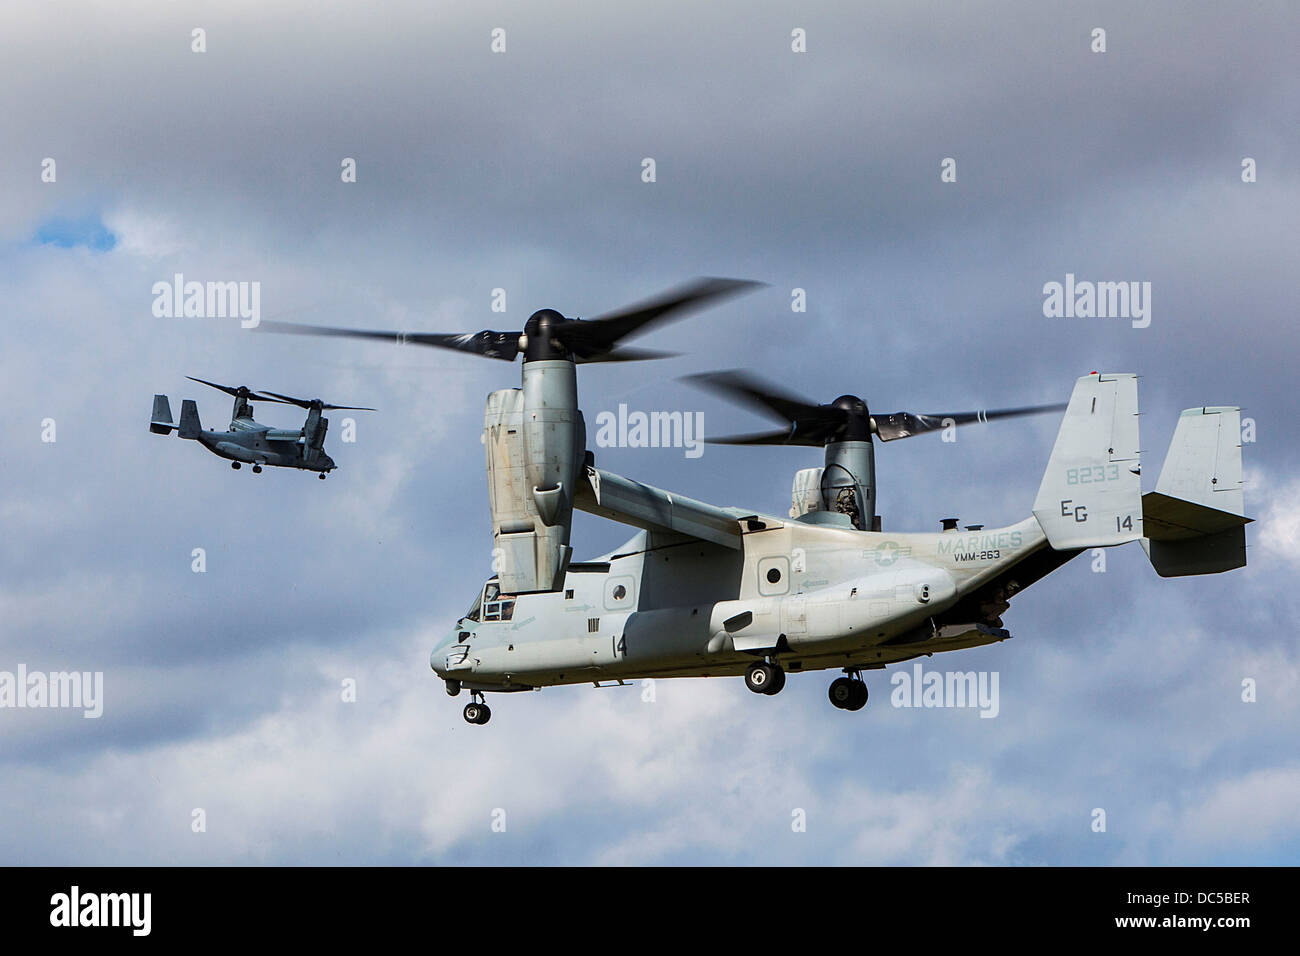 US Marine Corp MV-22 Osprey aircraft prepare to land in a field during a mass casualty evacuation exercise August 7, 2013 at Marine Corps Base Camp Lejeune, North Carolina. Stock Photo